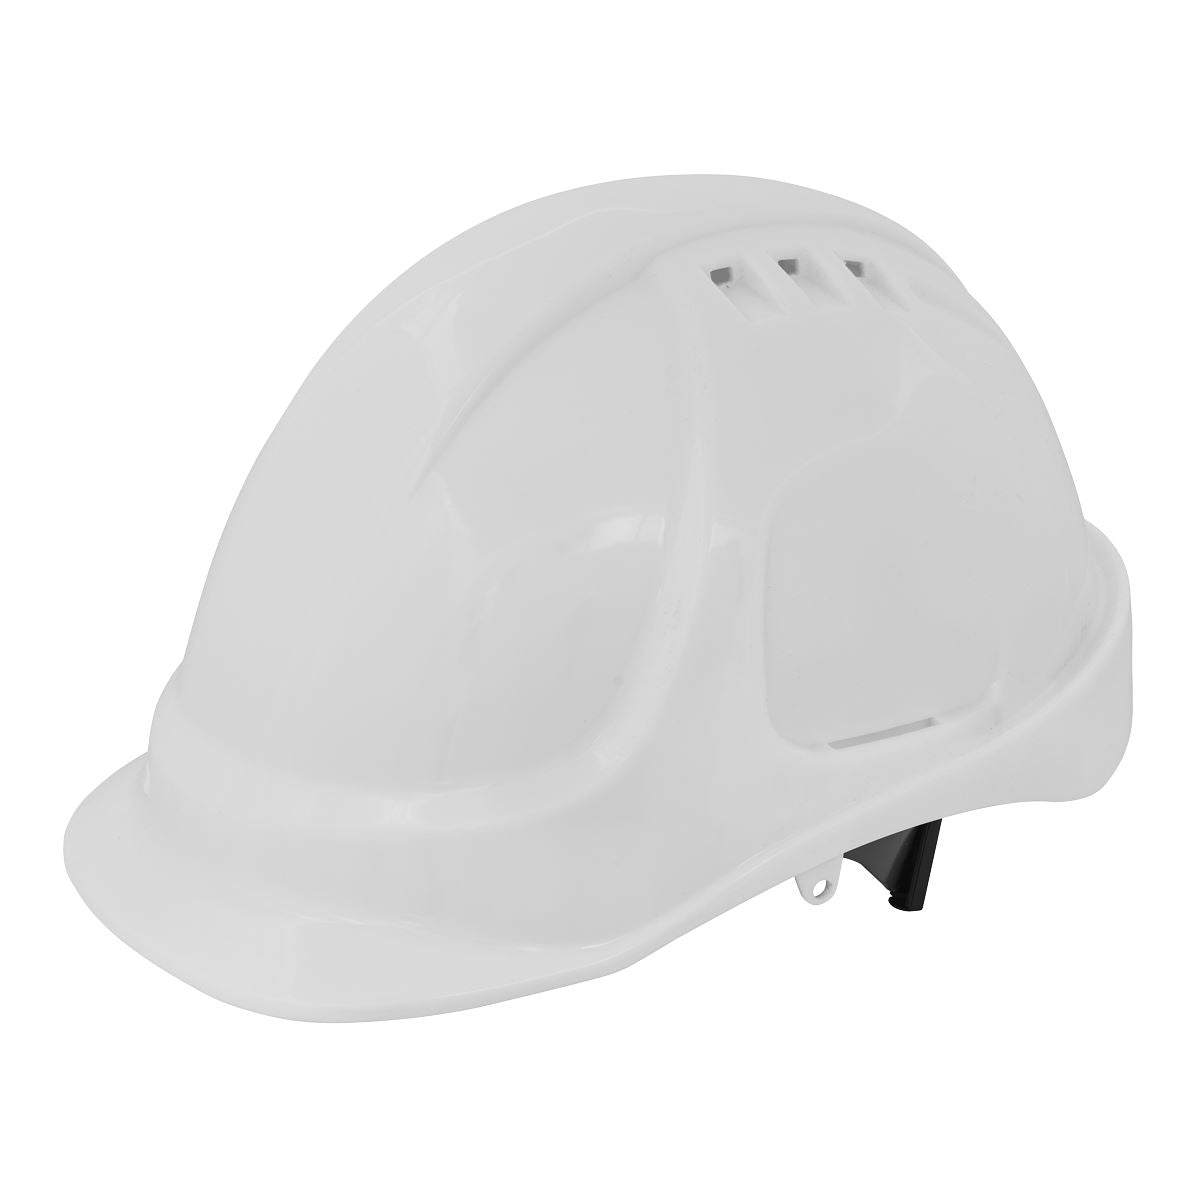 Worksafe by Sealey Safety Helmet - Vented (White)